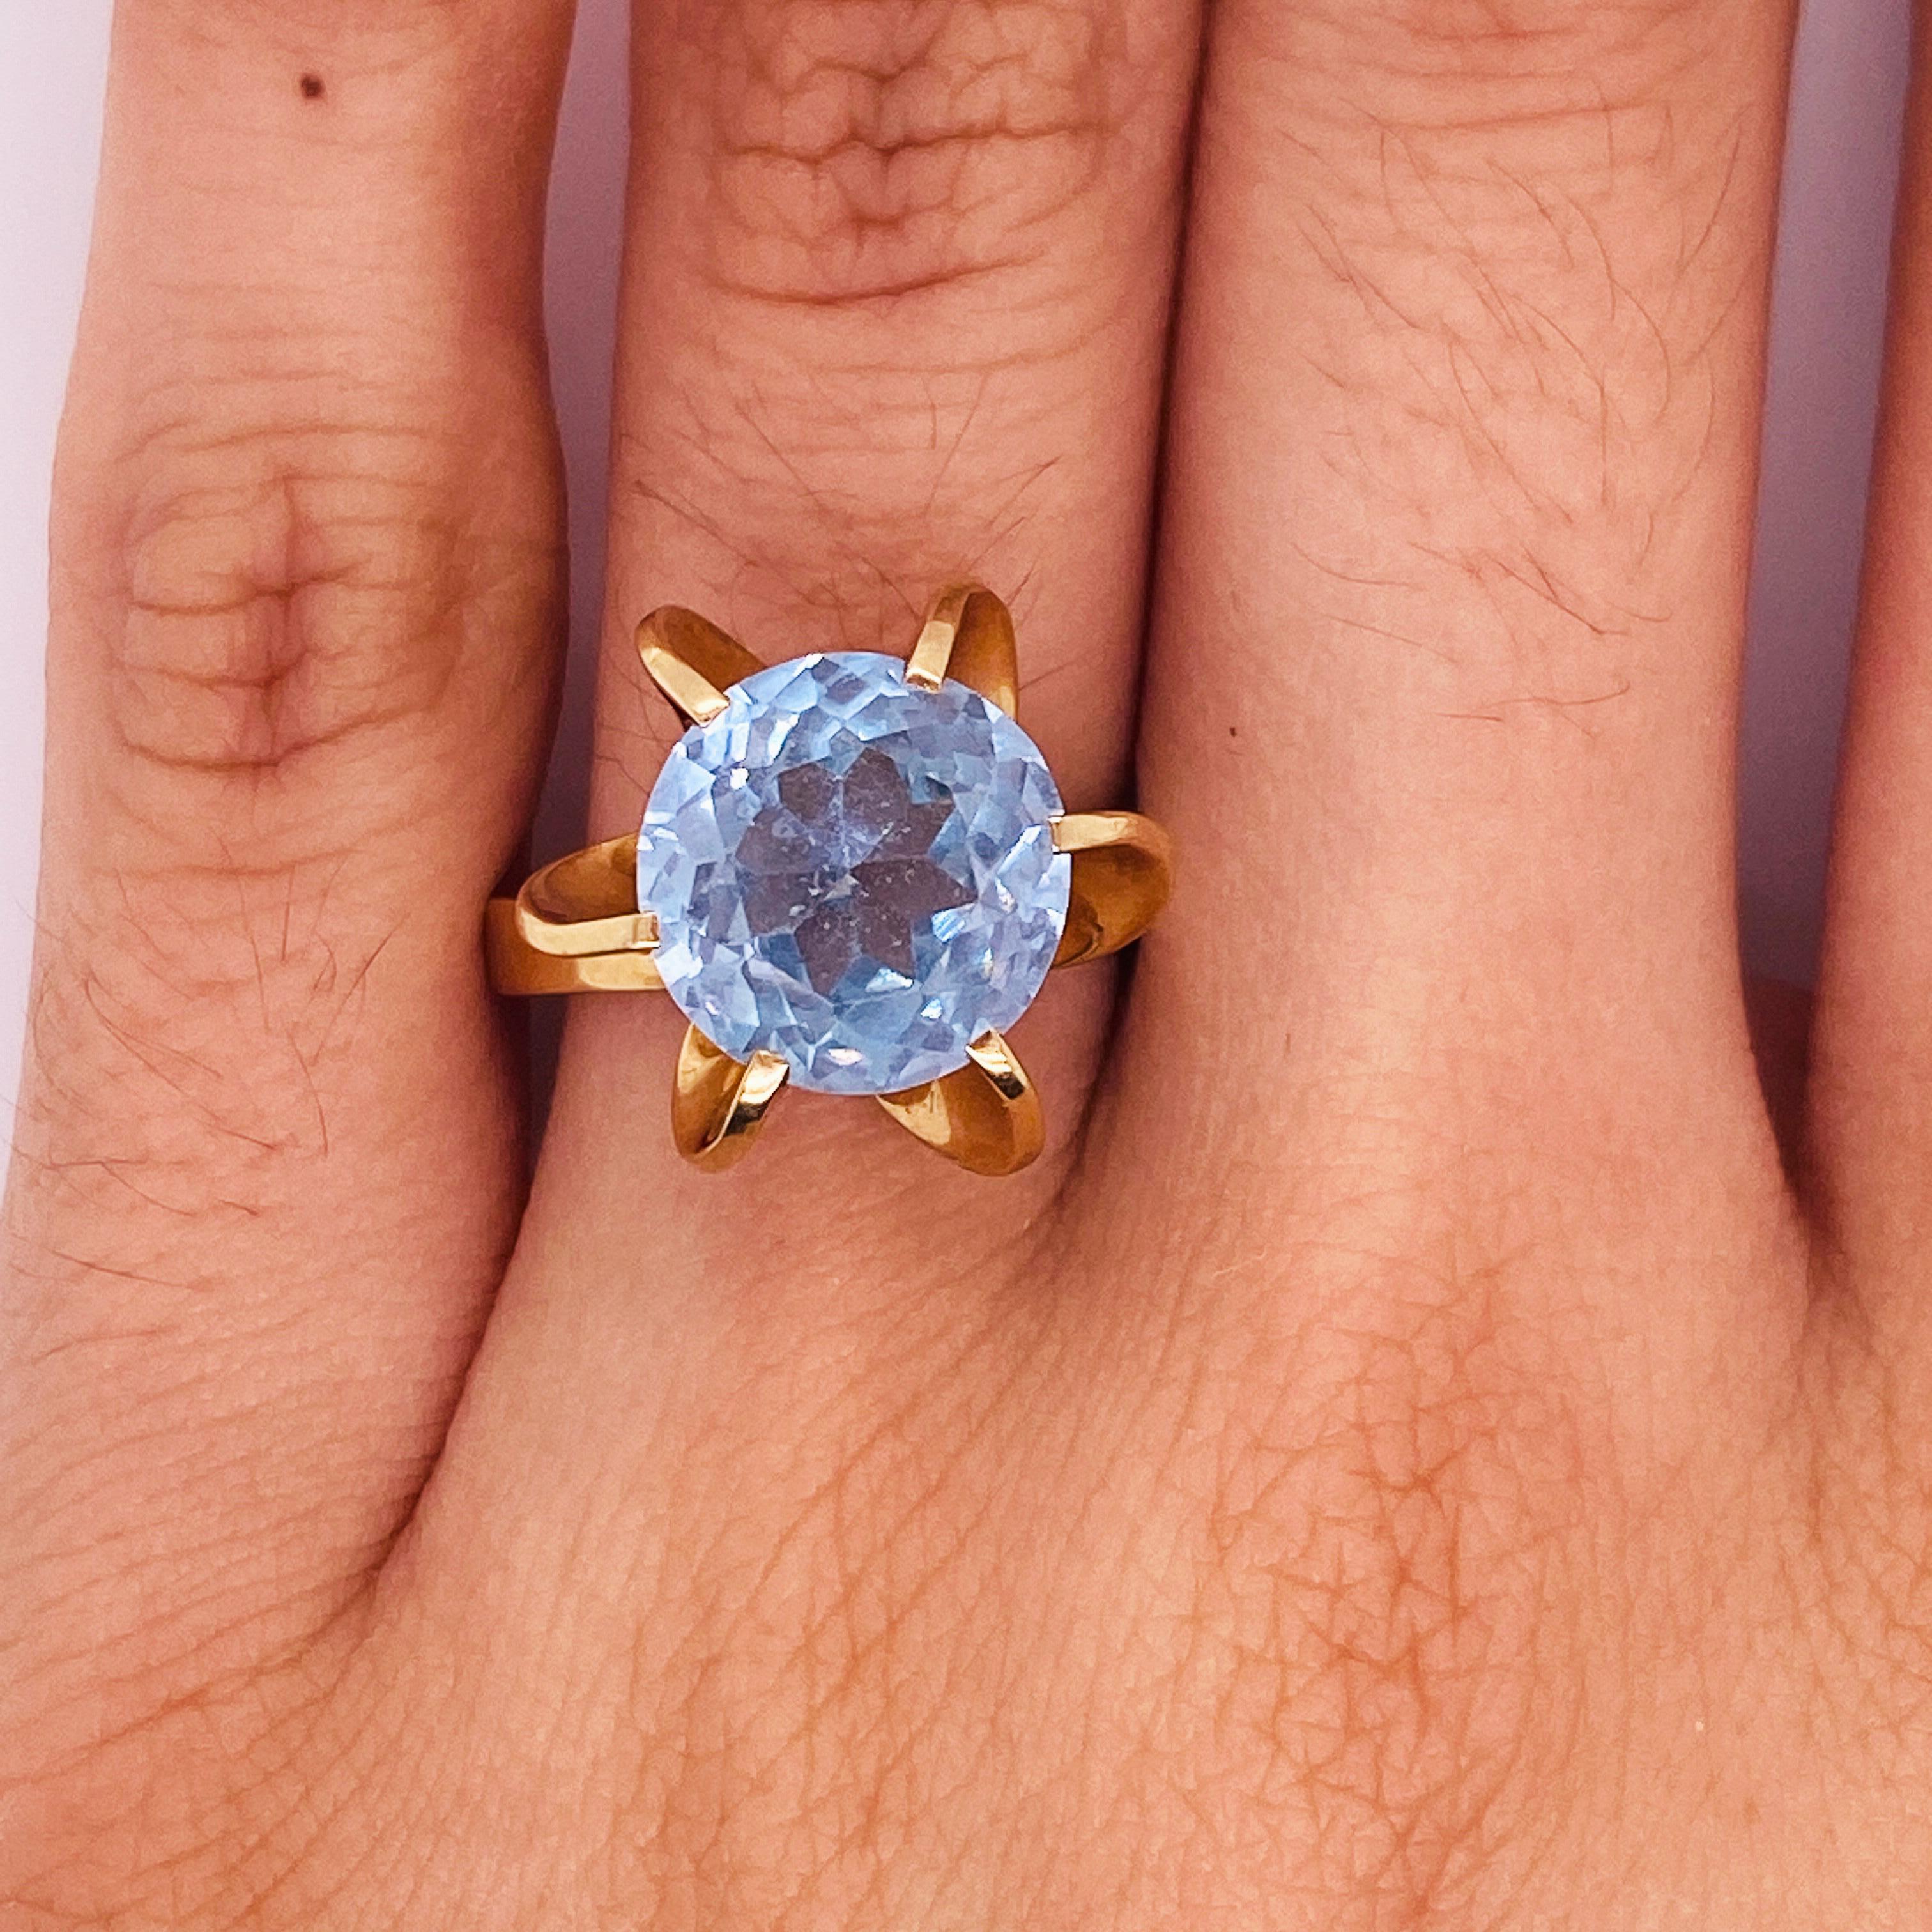 Adorn your look with this unusual blue topaz that is caught mid-spiral on your finger! Remember a breeze from a memory every time you look at the cool blue topaz in the center of this fabulous fan setting! Suspended in a moment, the twist to the